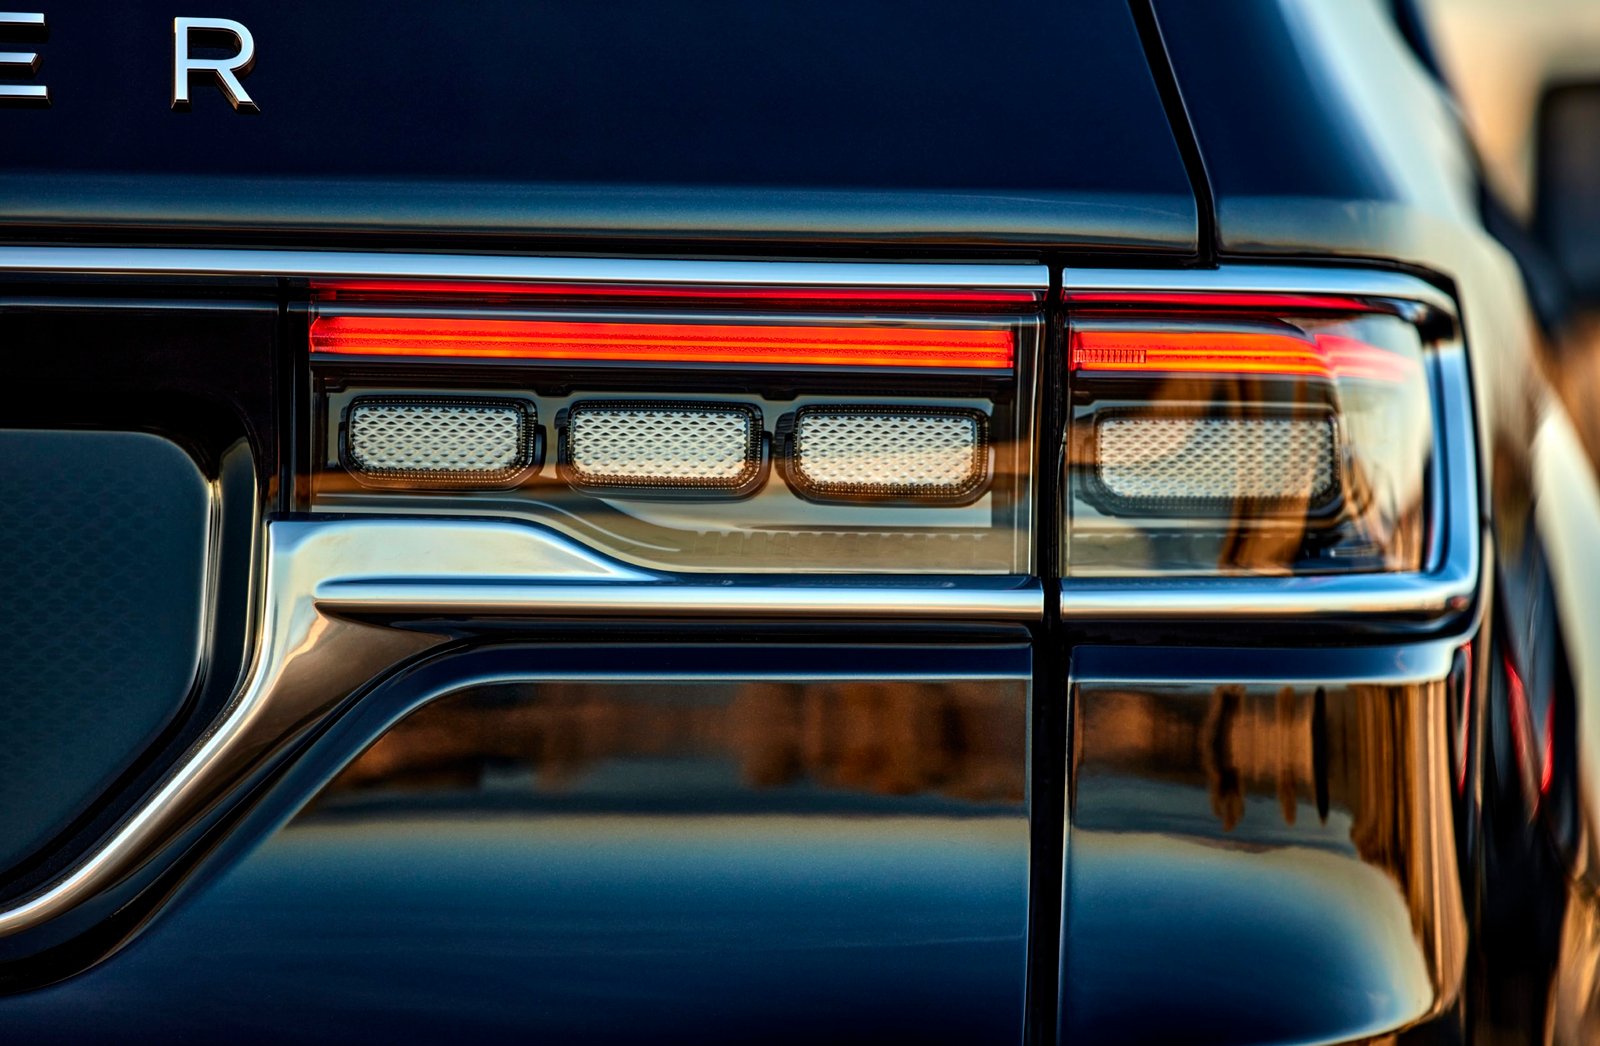 All-new 2022 Grand Wagoneer features LED taillamps stretching from the rear quarter panel to the liftgate achieving a more upscale appearance.